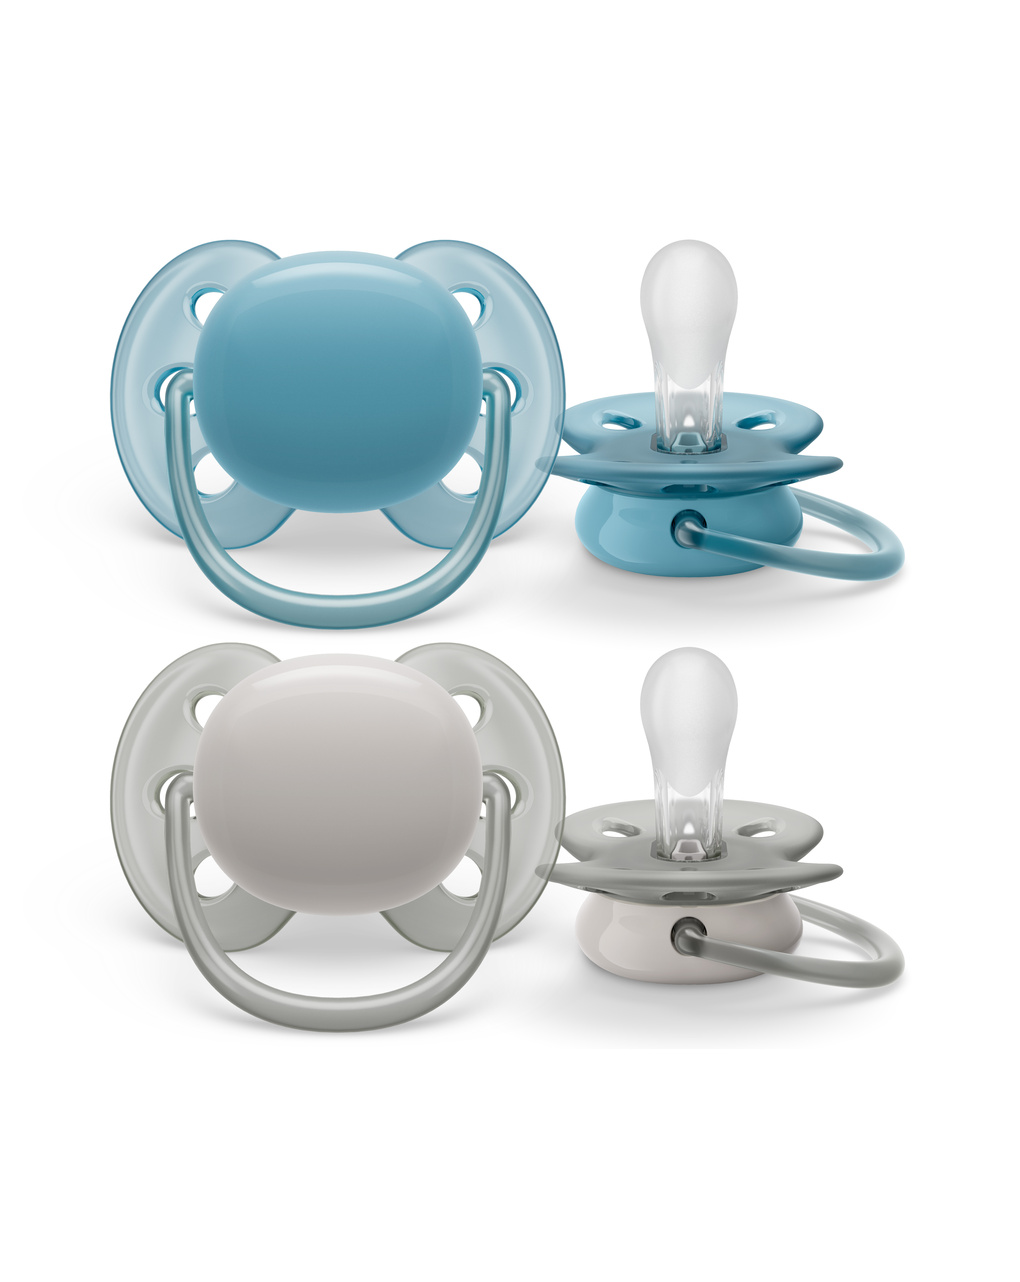 2 chupetes ultra suaves 6-18 meses color azul claro/gris - philips avent - Philips Avent